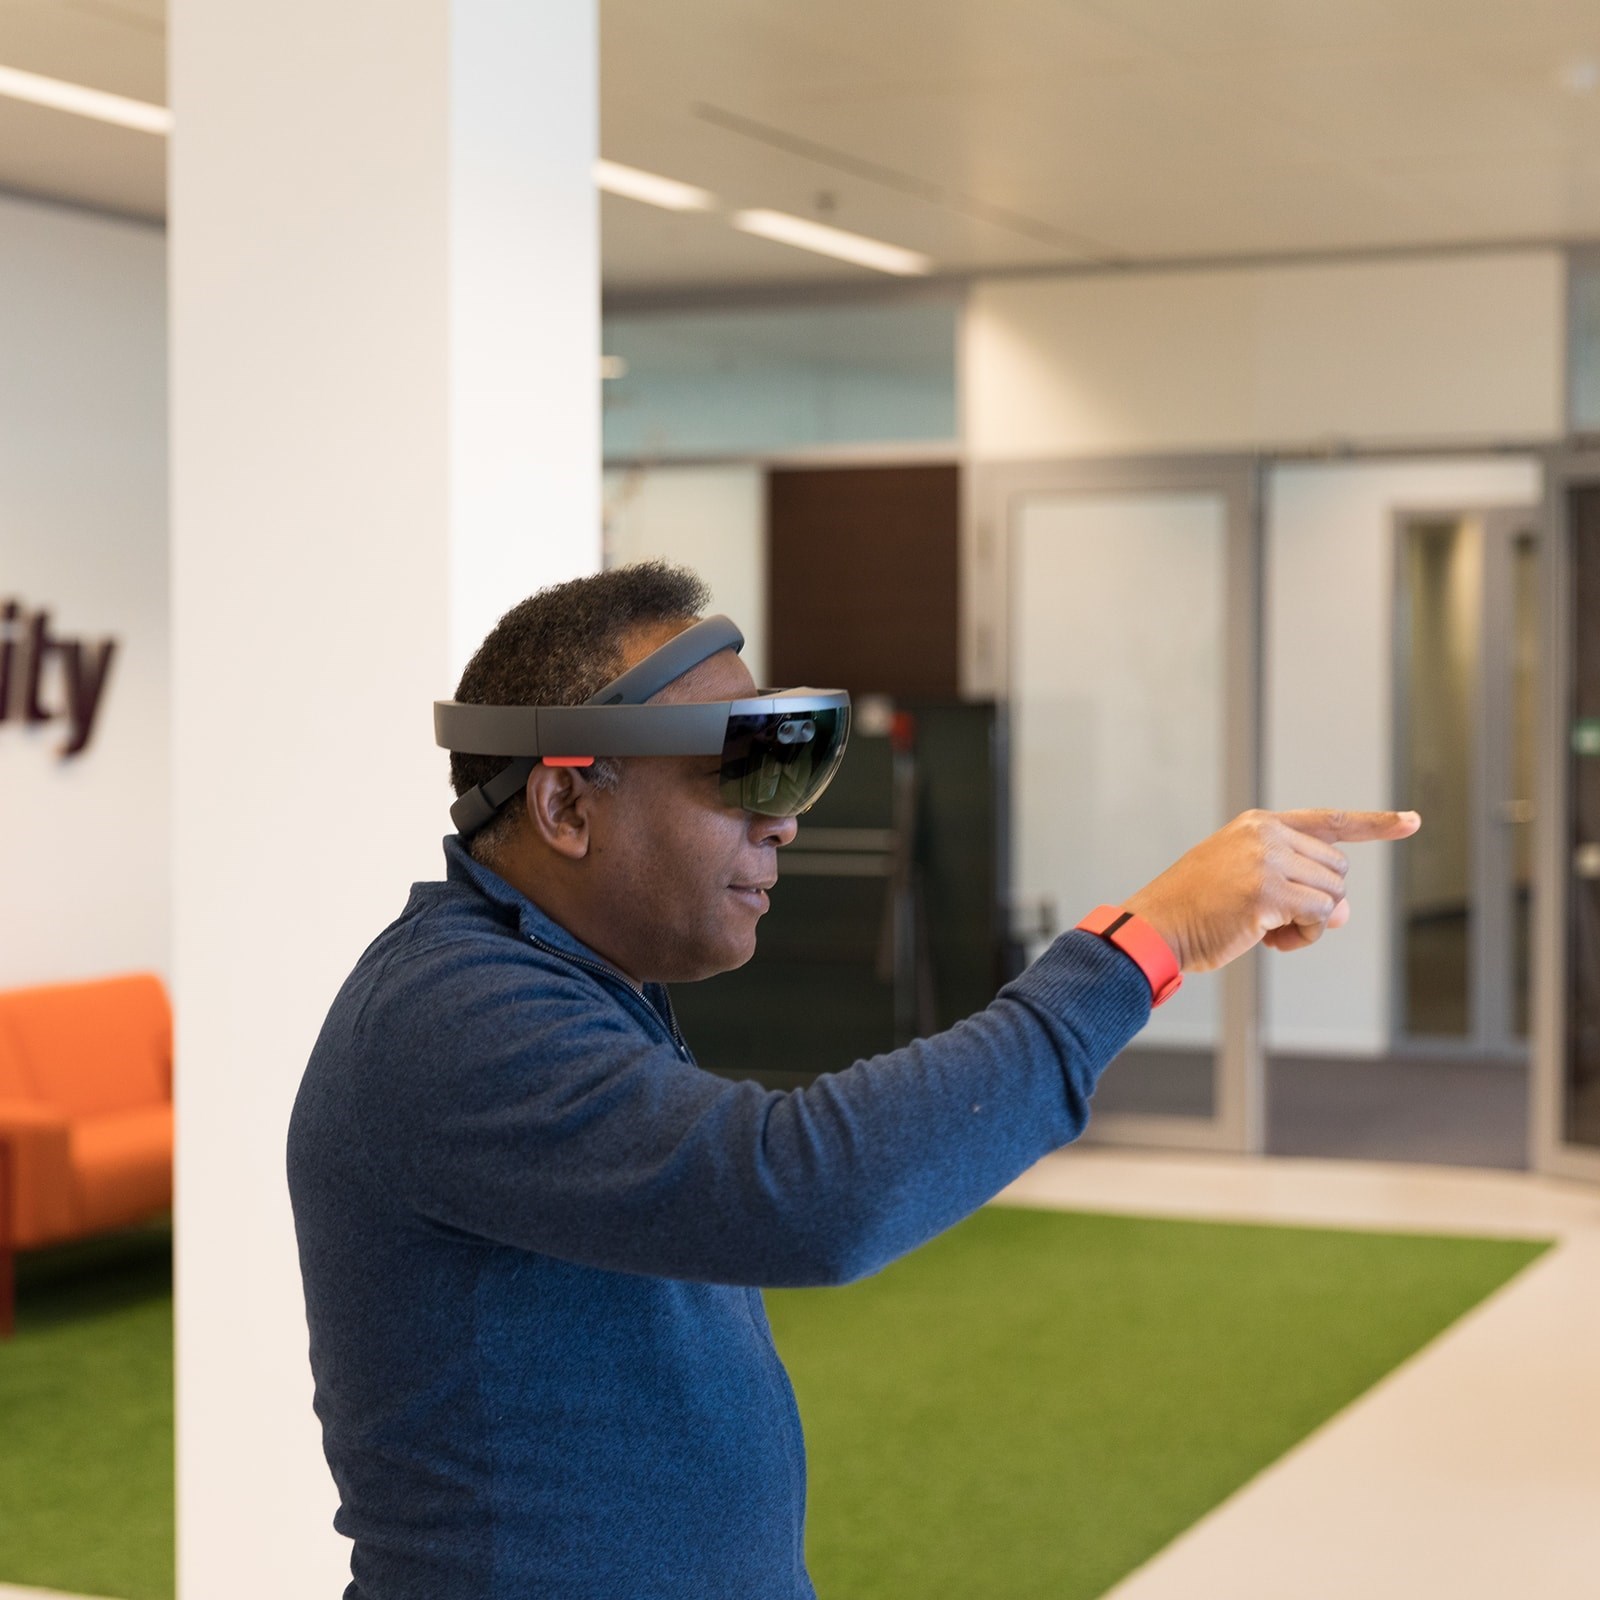 image of hololens at Iquality.